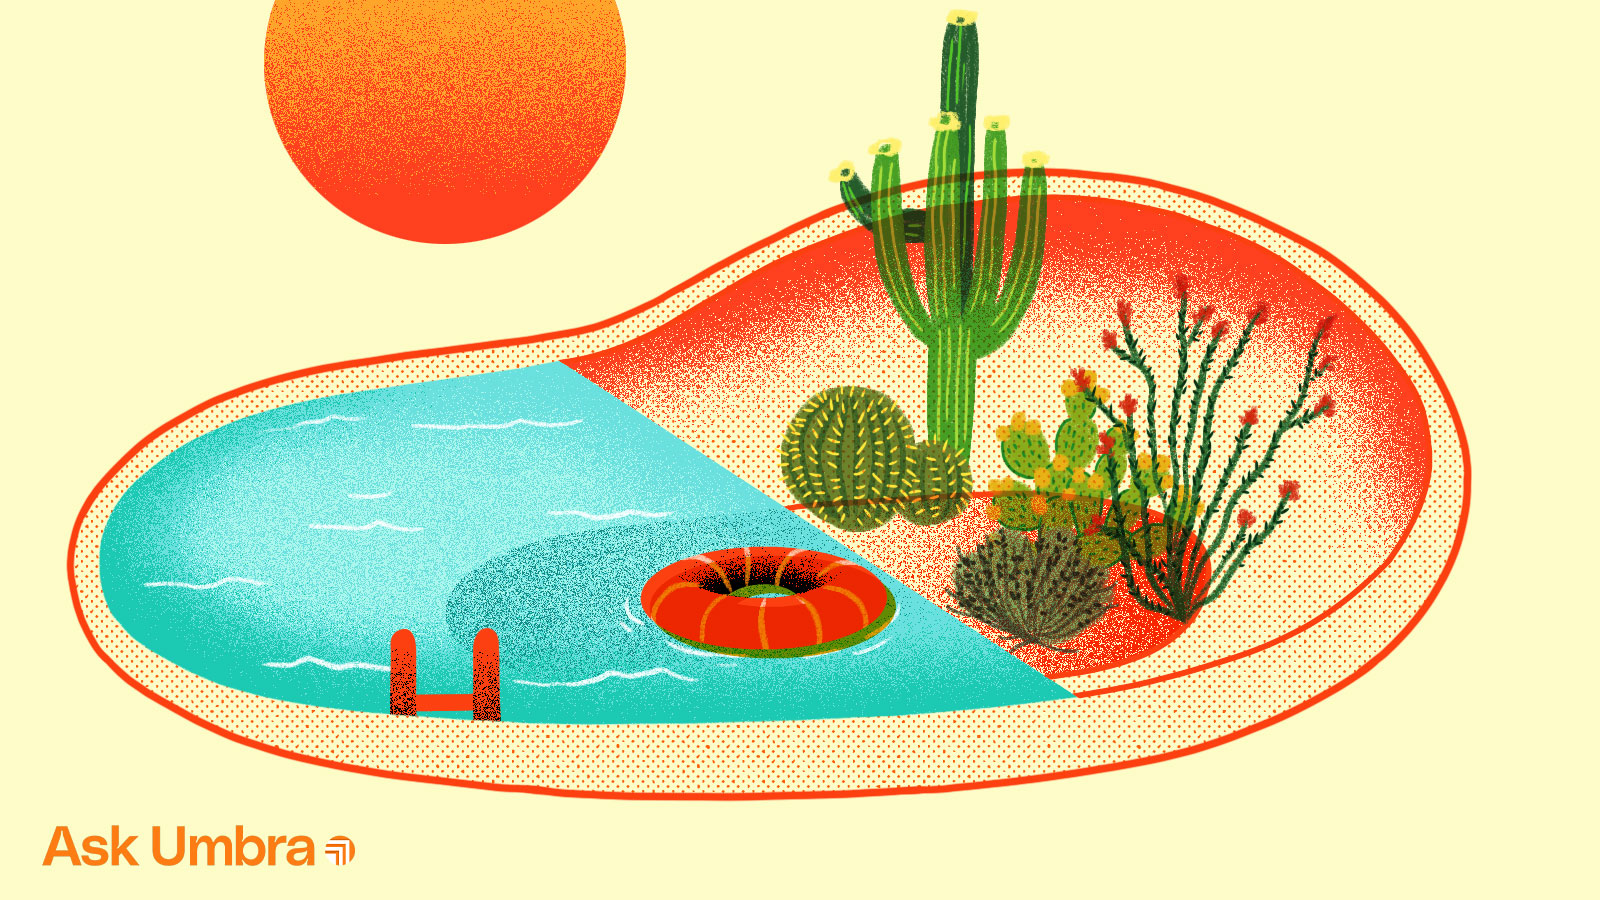 Illustration: A pool with one half filled with water and the other half filled with desert plants